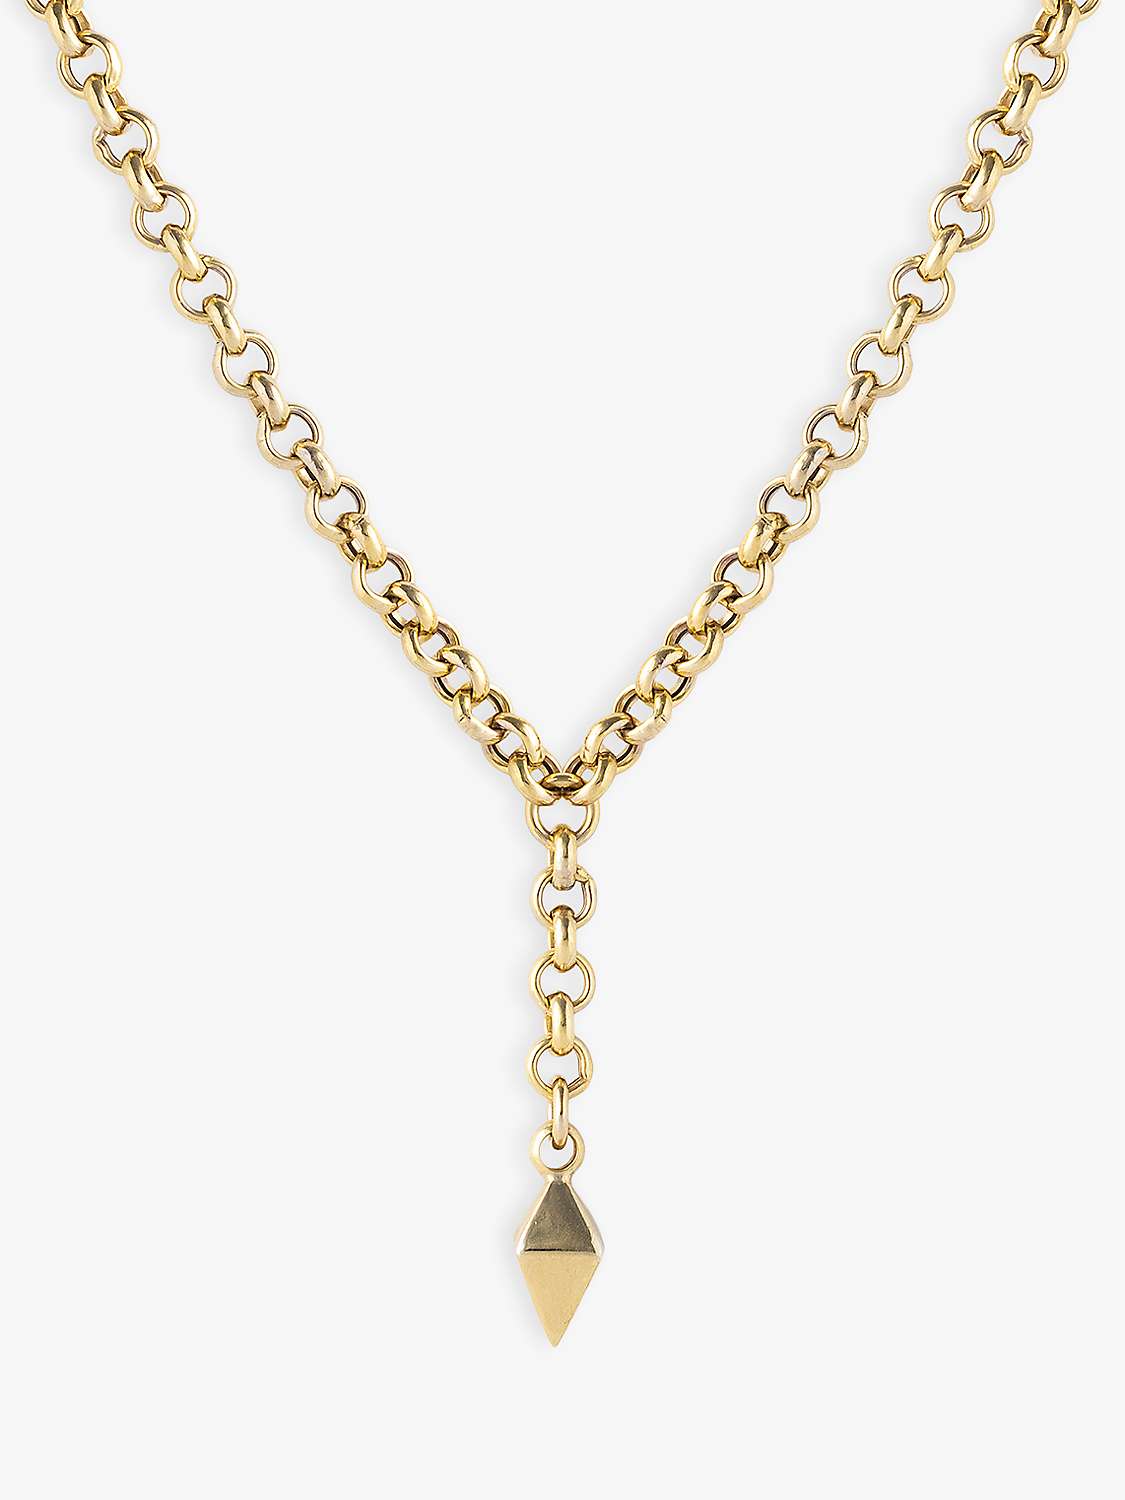 Buy LARNAUTI Pyramid Drop Chain Necklace, Gold Online at johnlewis.com